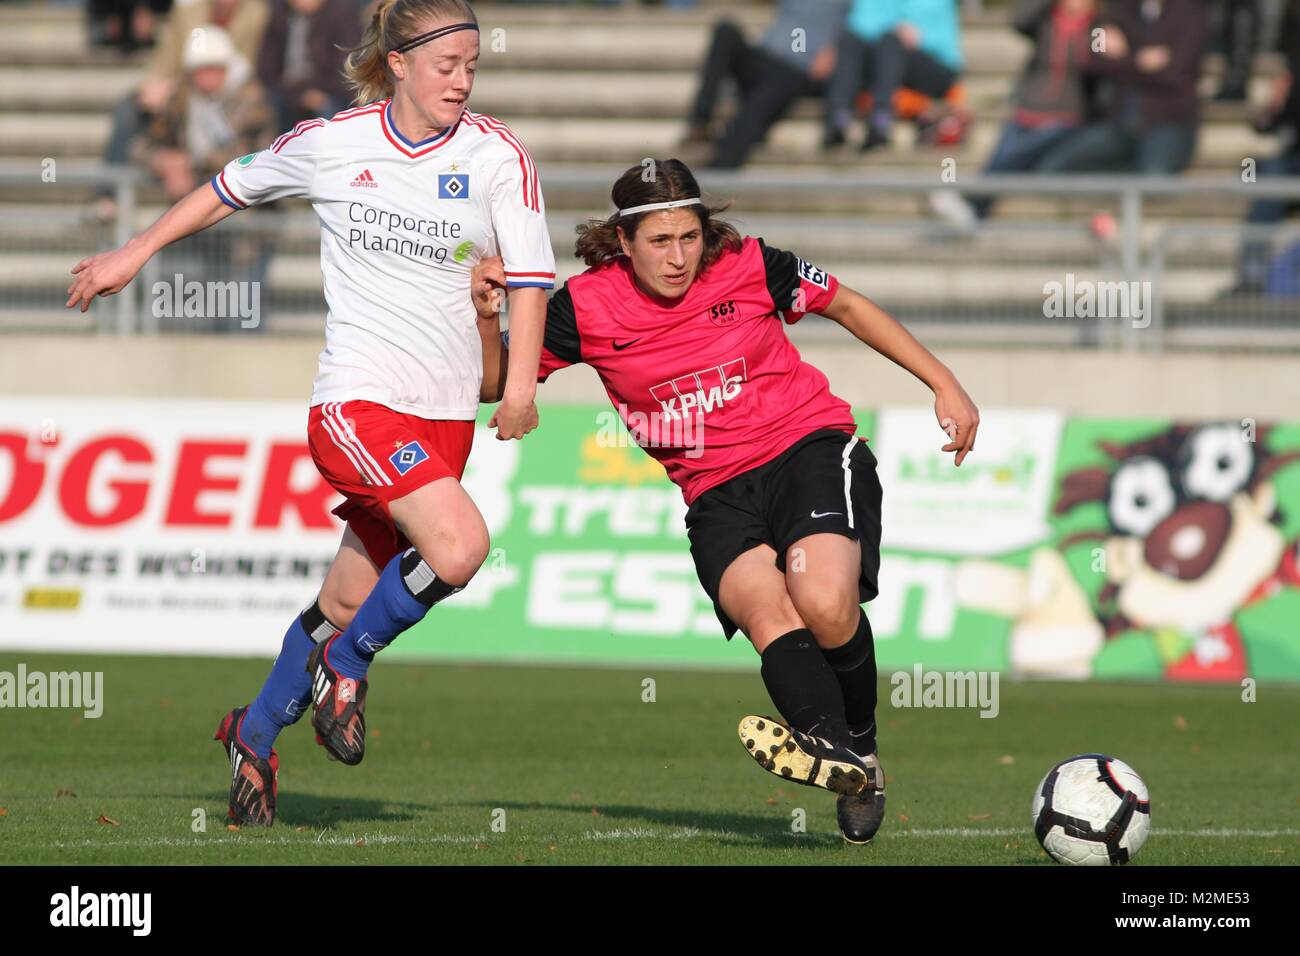 Page 2 - Frauenfussball High Resolution Stock Photography and Images - Alamy